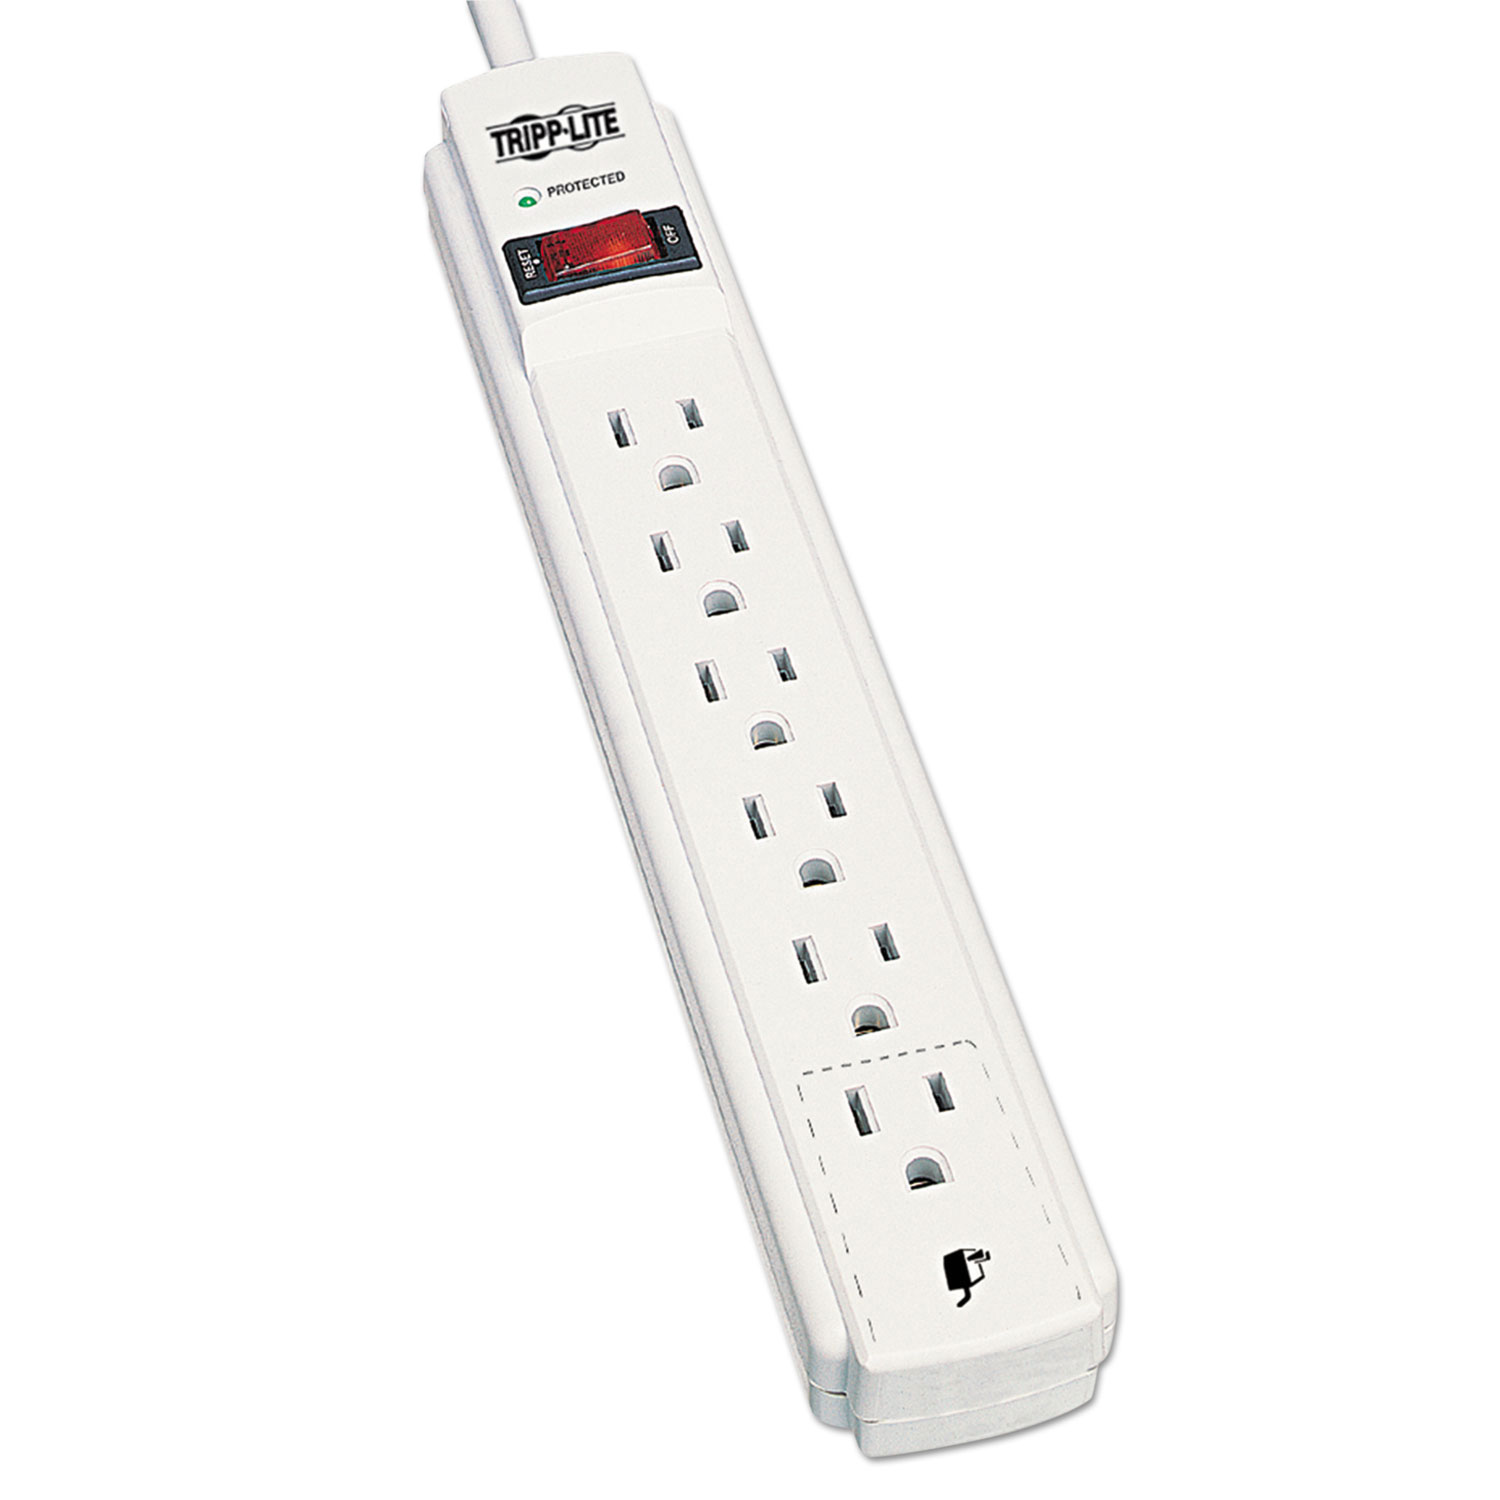  Tripp Lite TLP604 Protect It! Surge Protector, 6 Outlets, 4 ft. Cord, 790 Joules, Light Gray (TRPTLP604) 